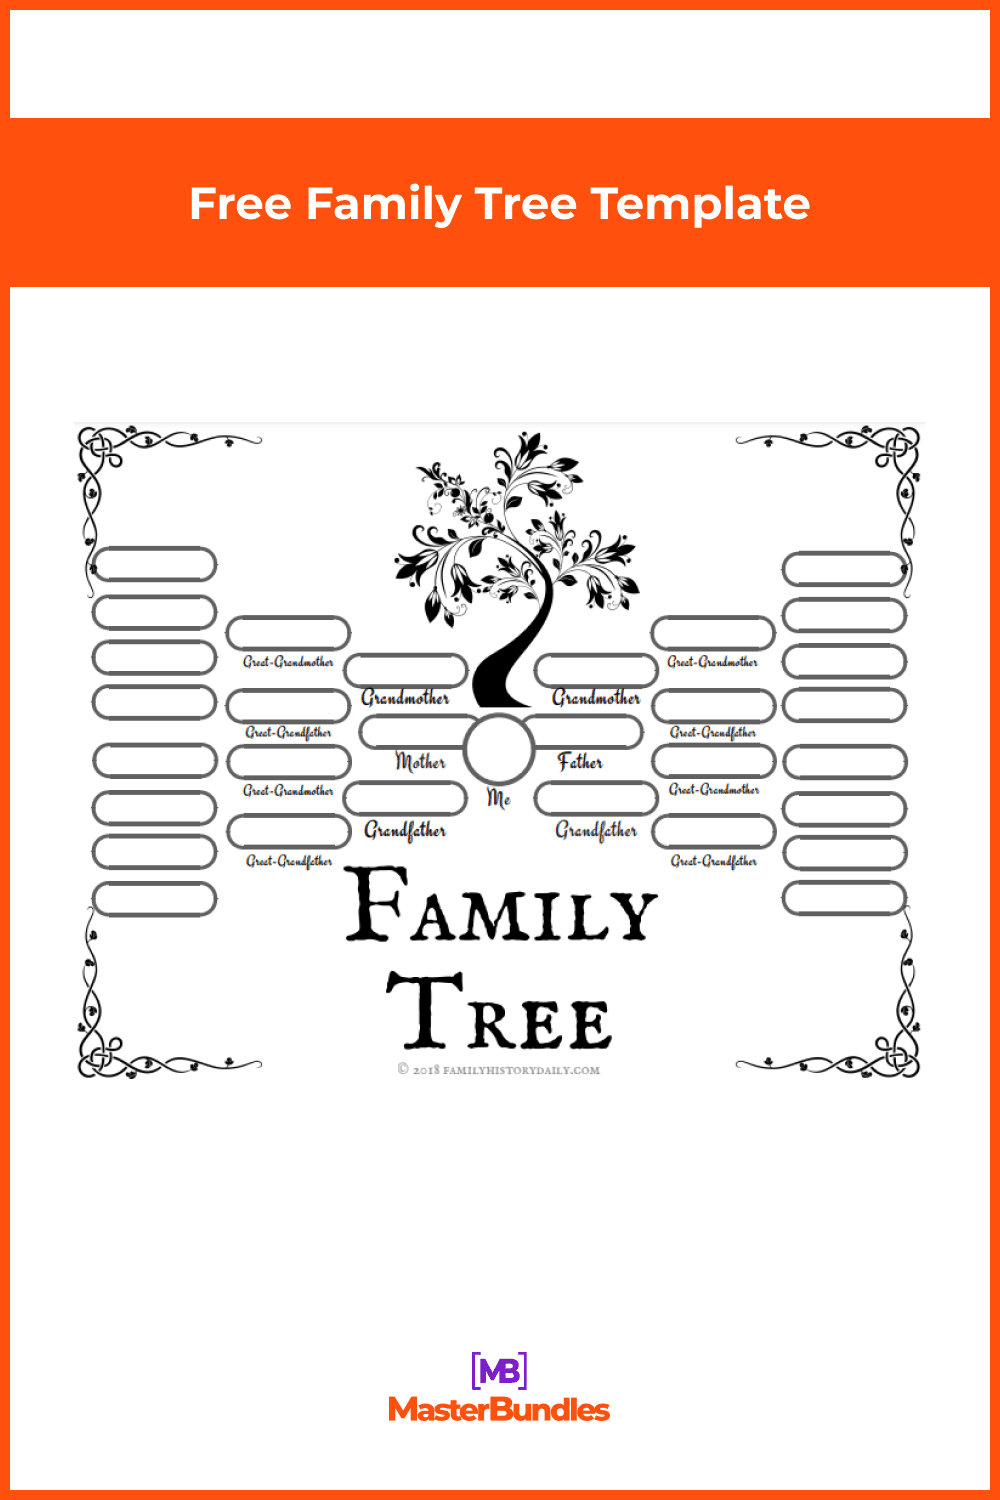 10+ Best Family Tree Templates Google Docs for 2021 Free and Premium